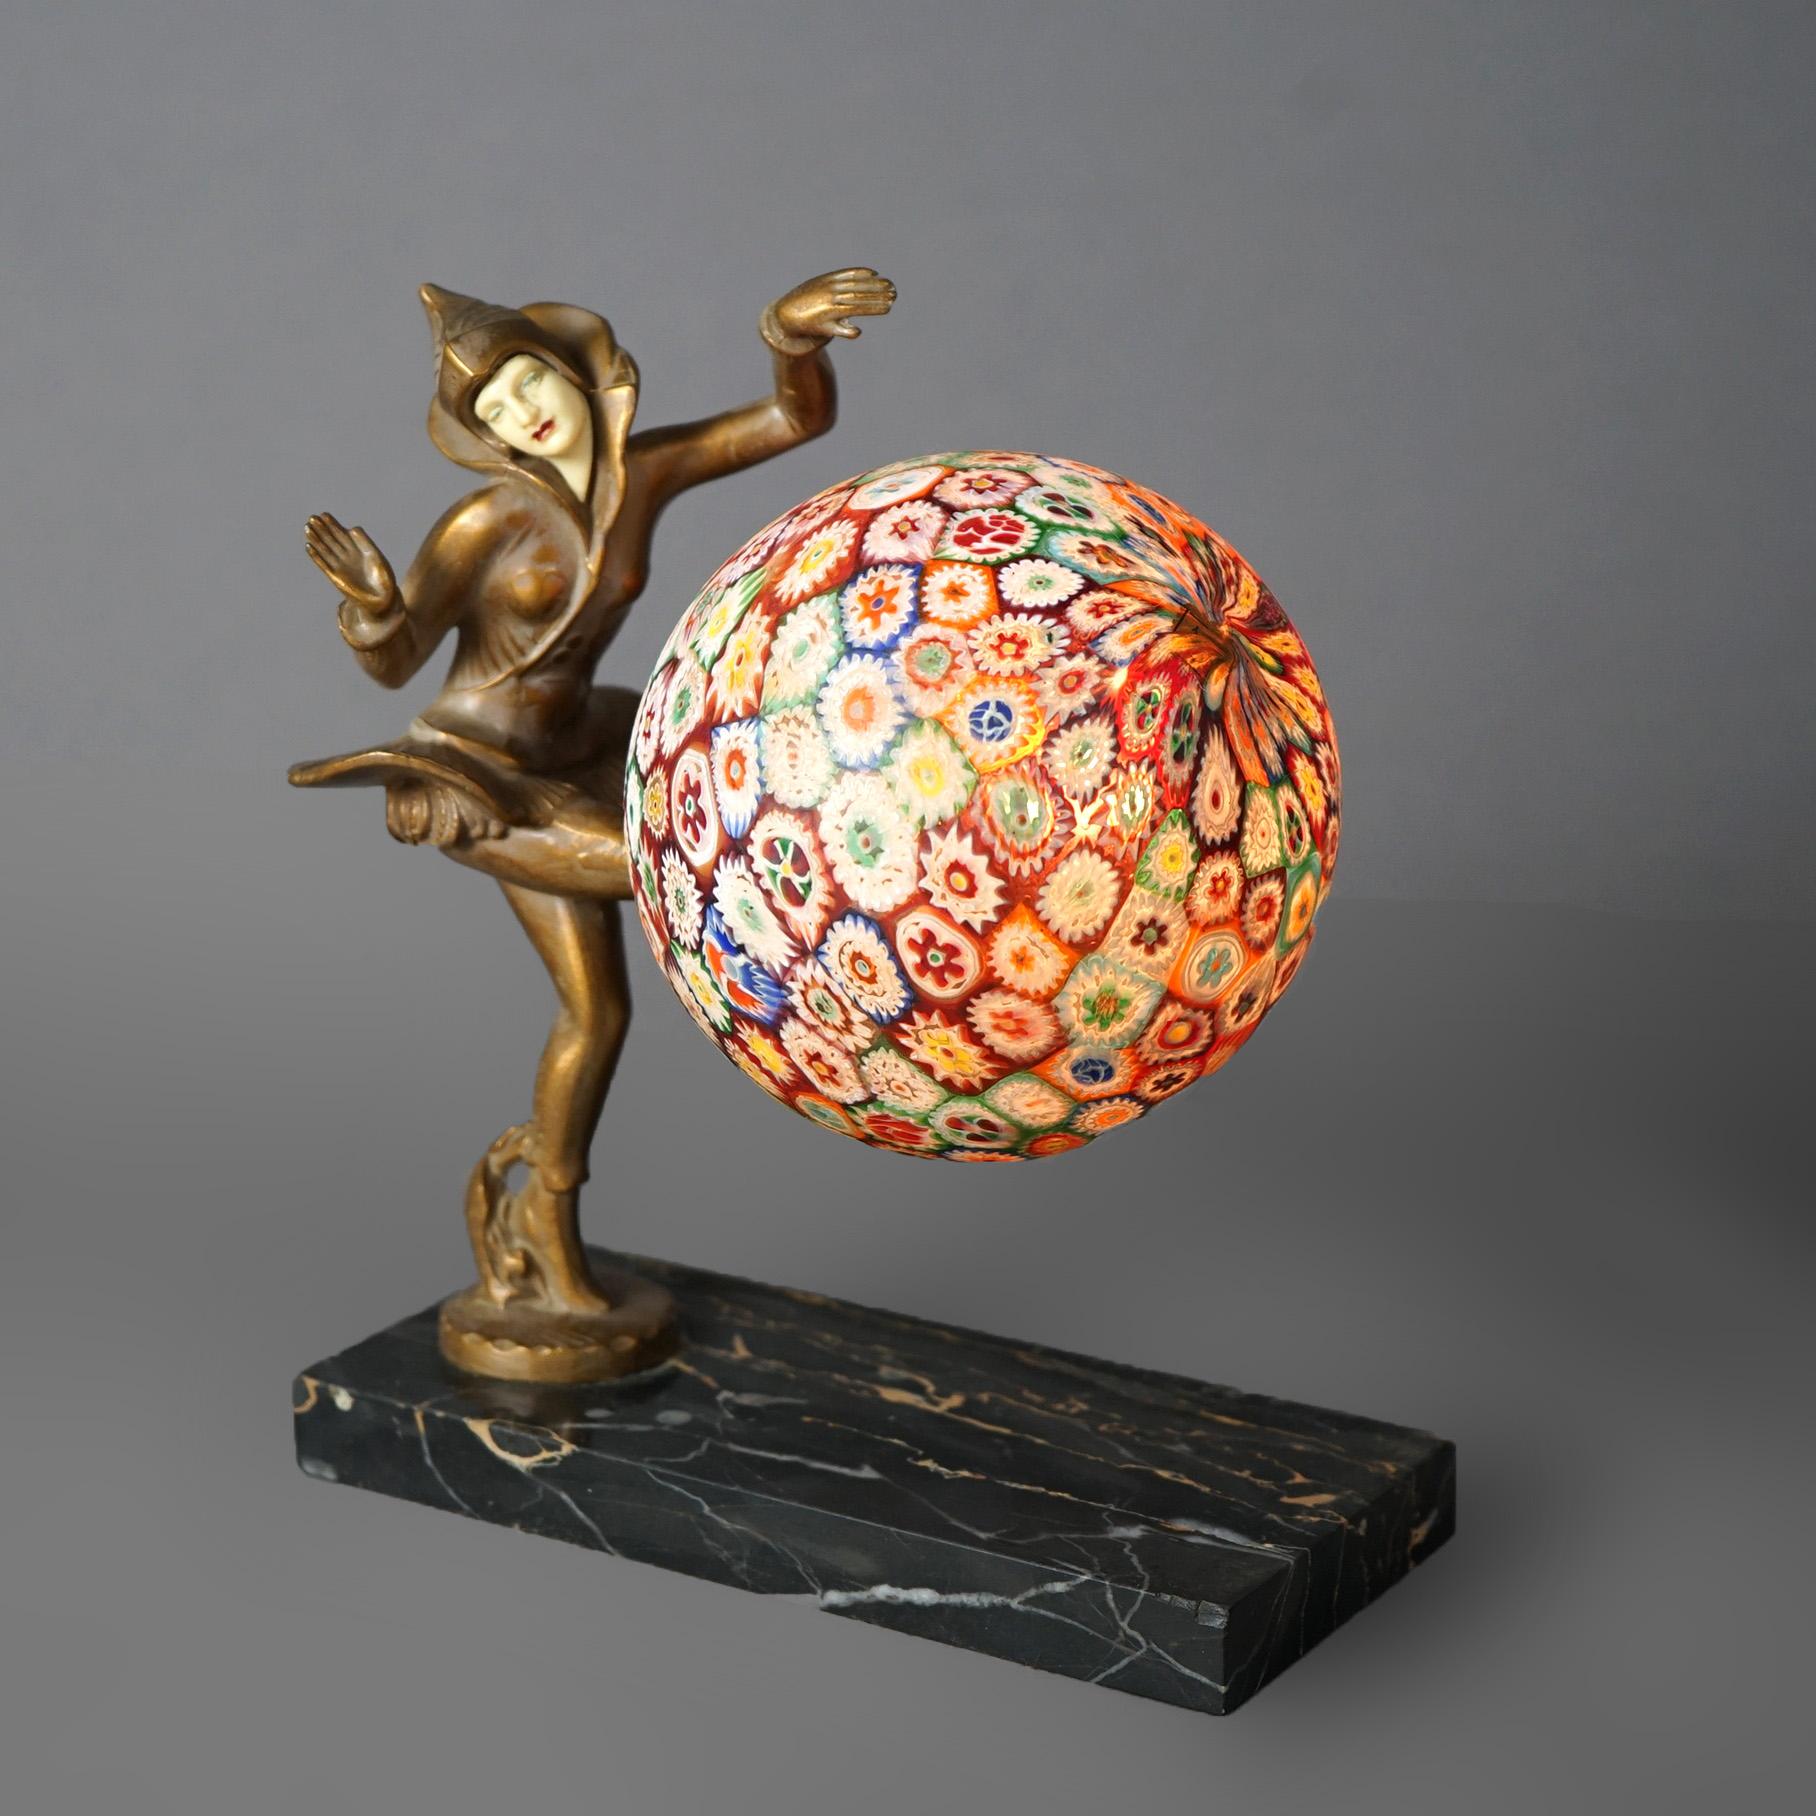 An antique Art Deco figural desk lamp offers base with cast metal sculpture of base a harlequin lady having celluloid face and playing with a millefiori glass ball form shade, c1930

Measures - 8.75